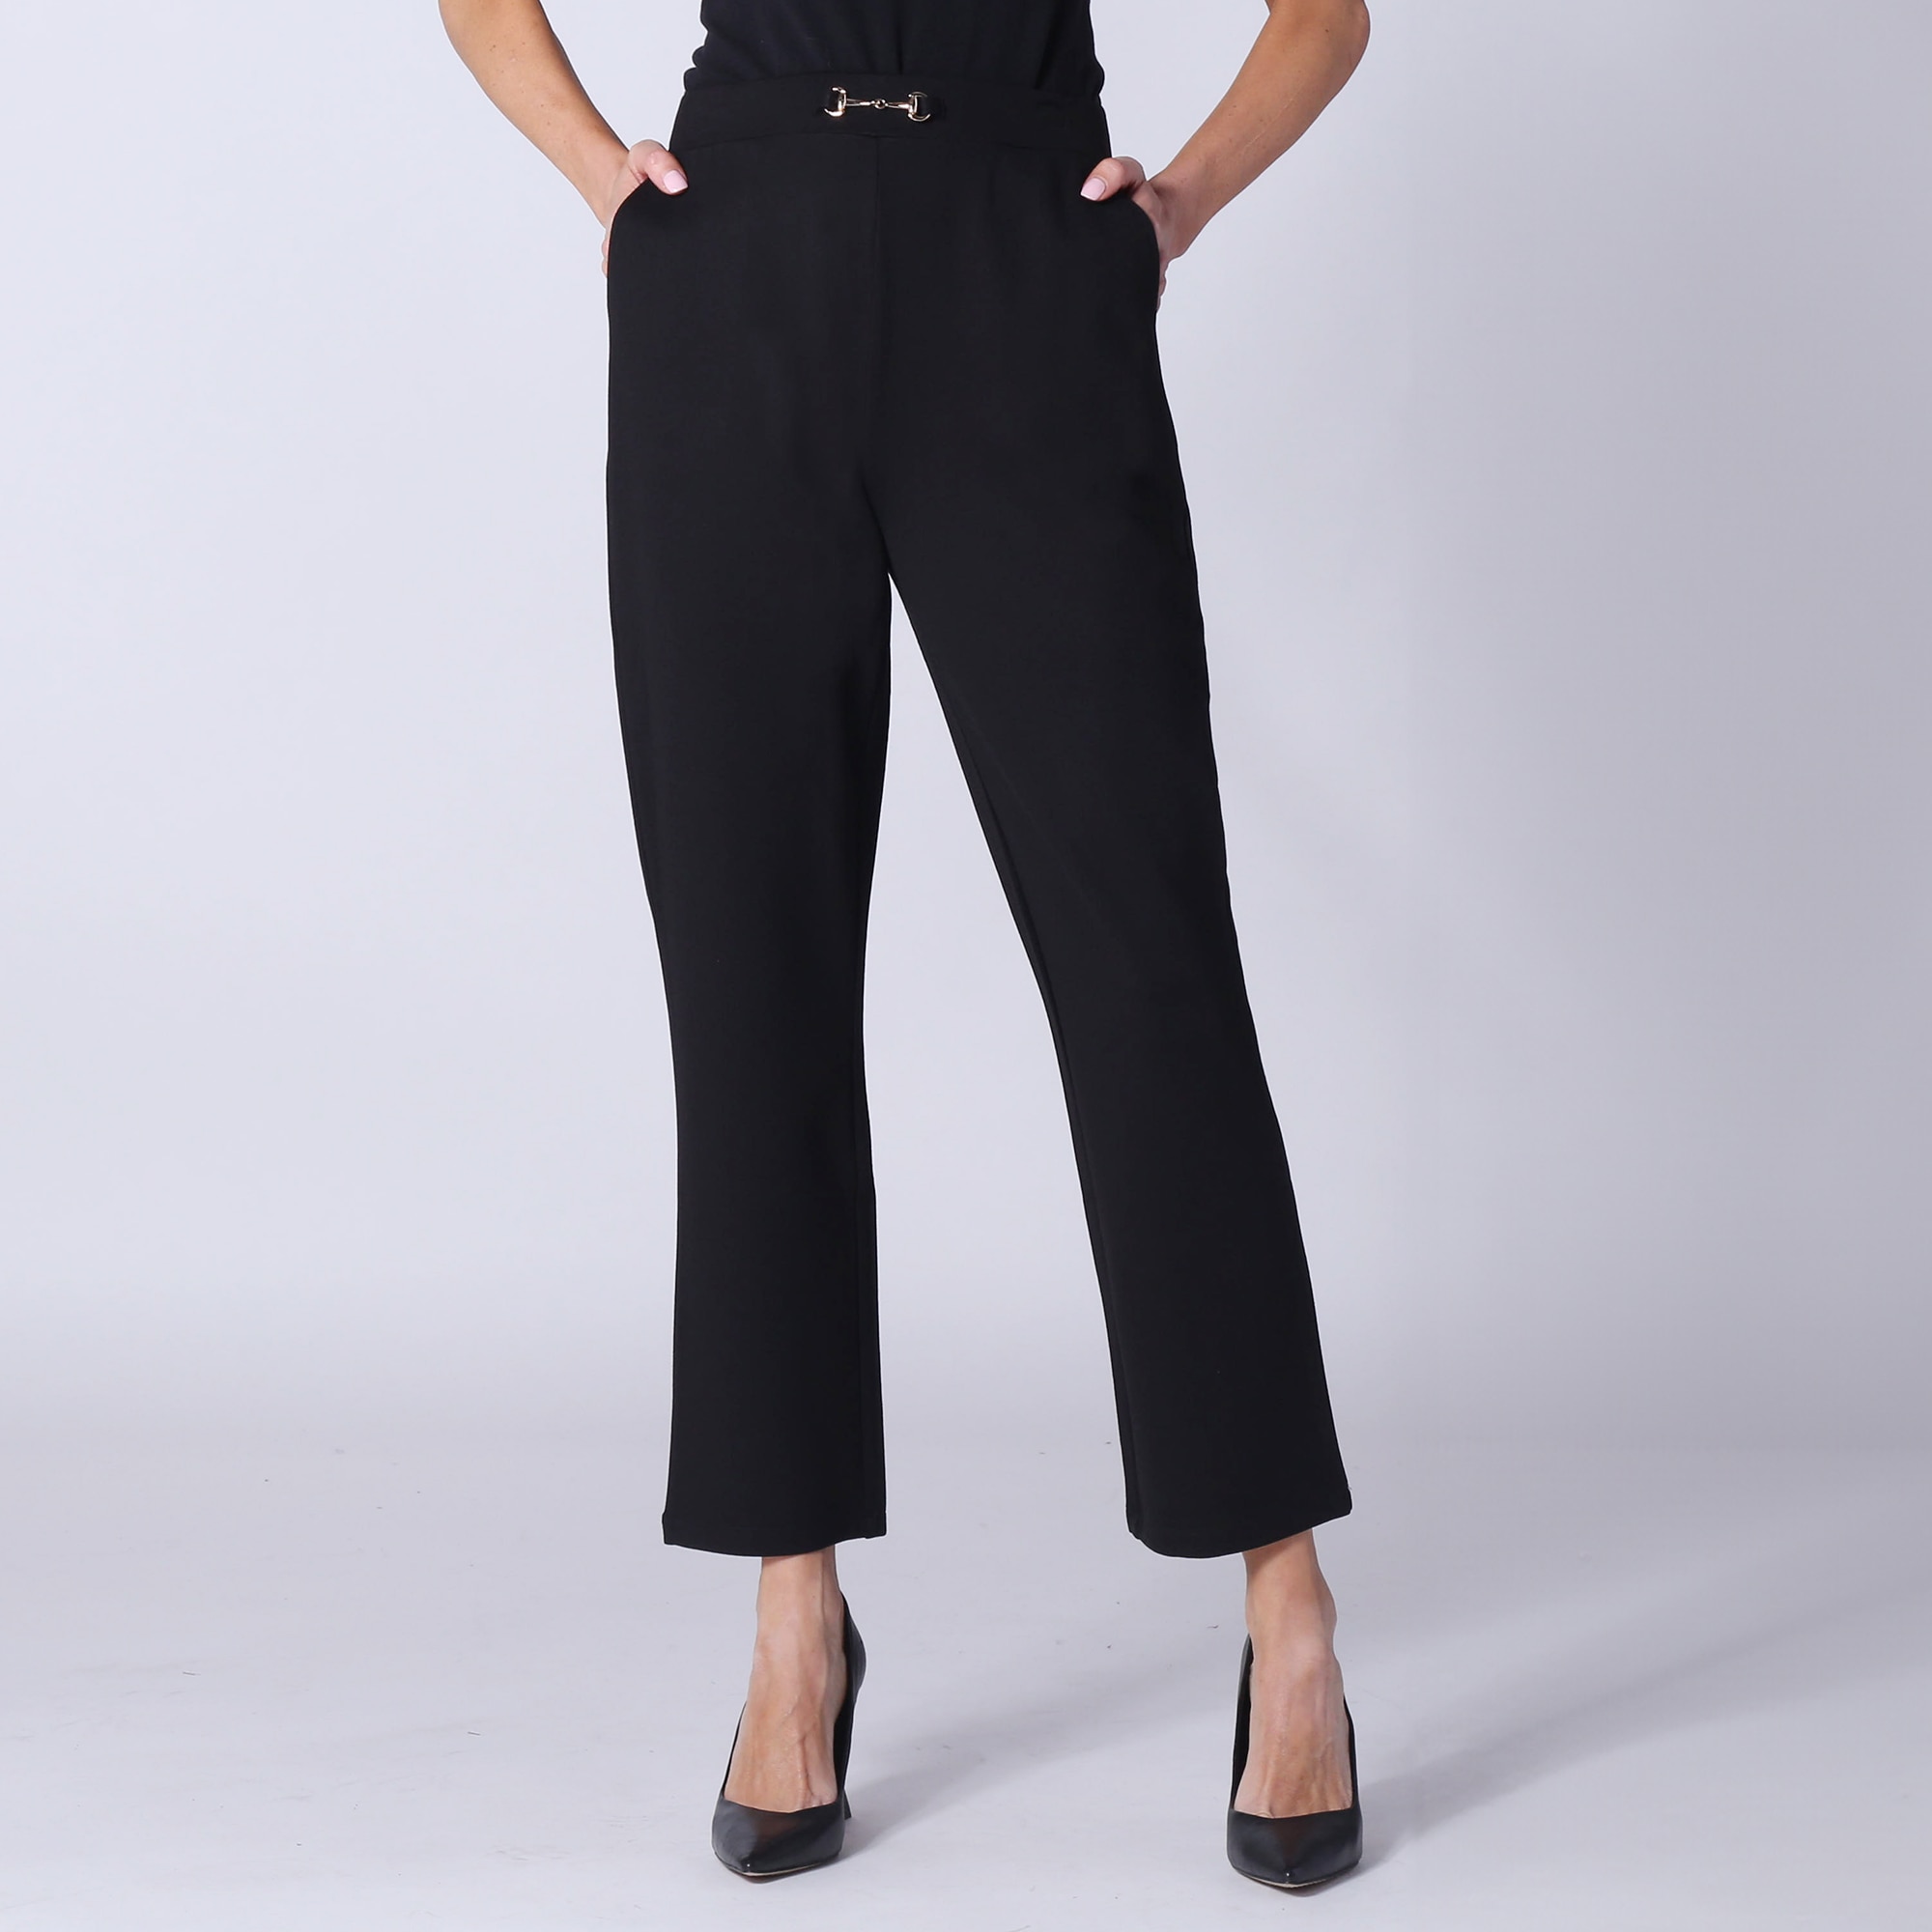 Guillaume Classic Slim Leg Pant With Belt Detail